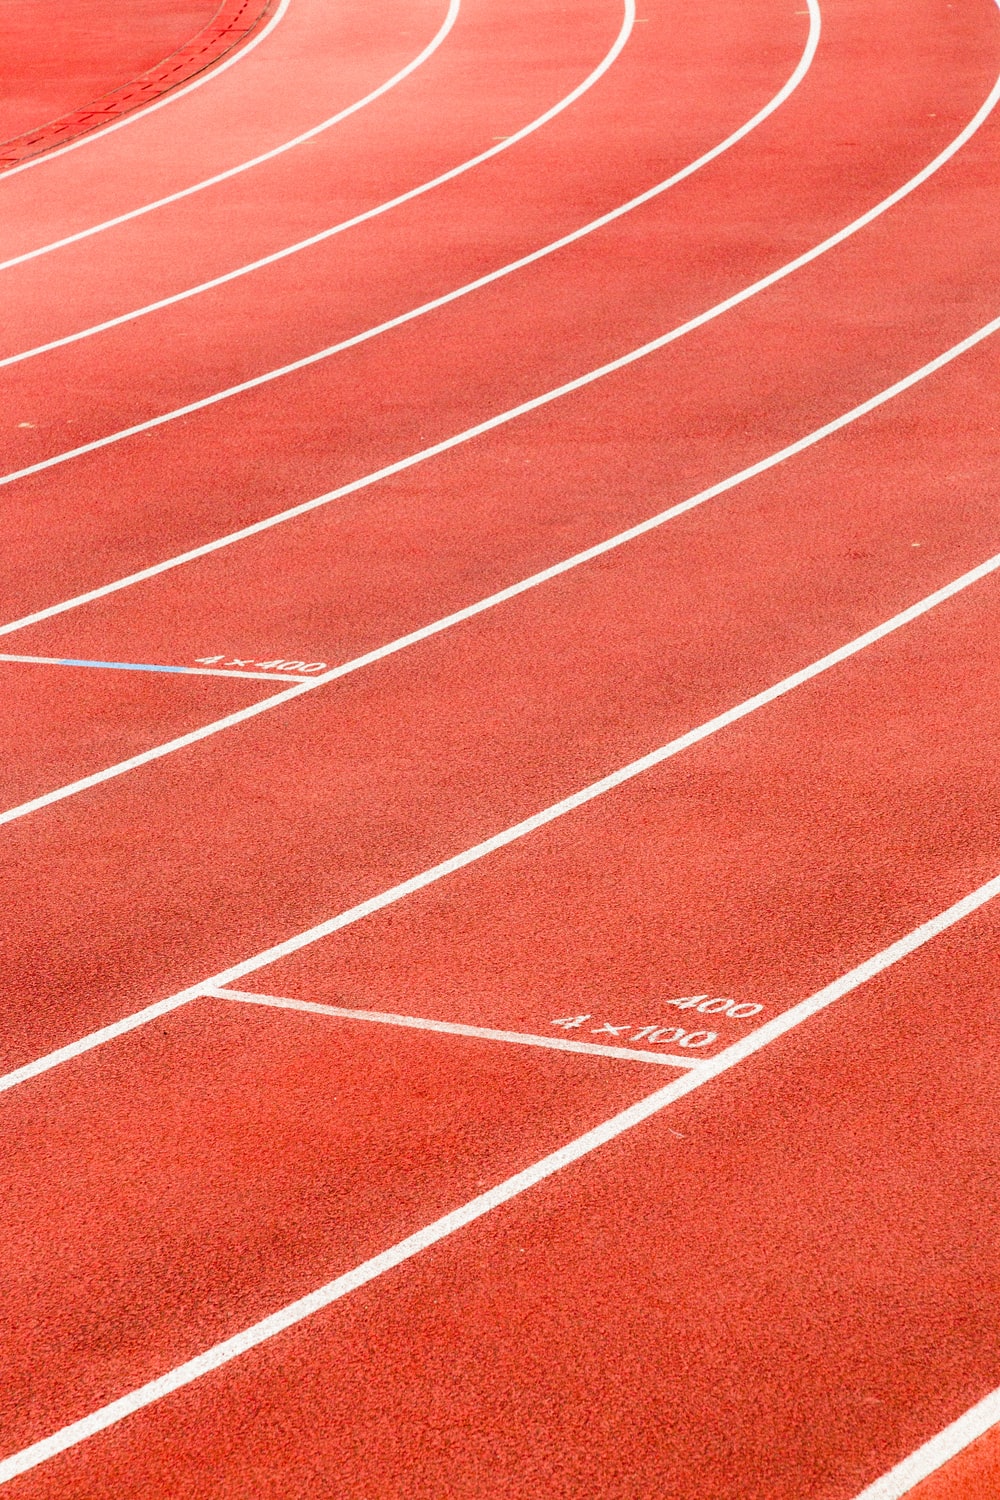 Wallpaper Track And Field Wallpapers